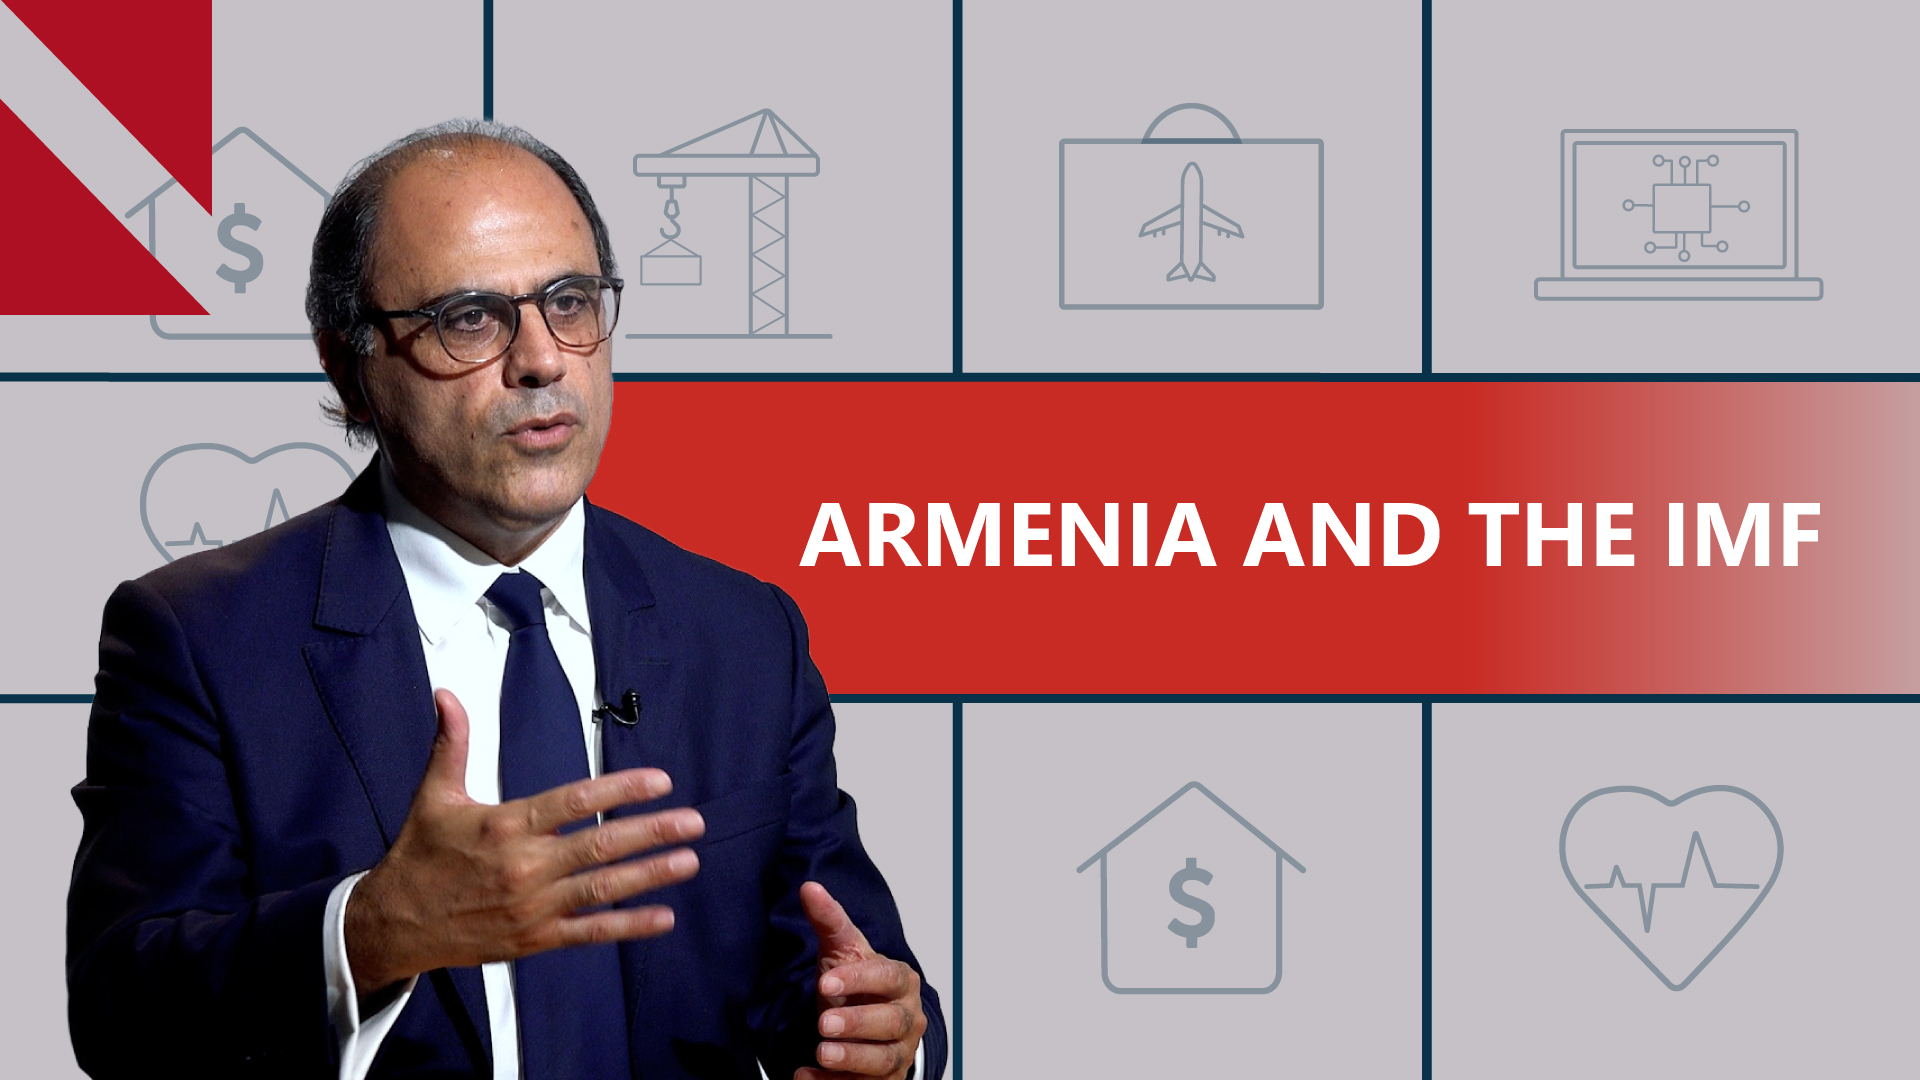 The IMF in Armenia: Relief, Reforms and Russia Sanctions